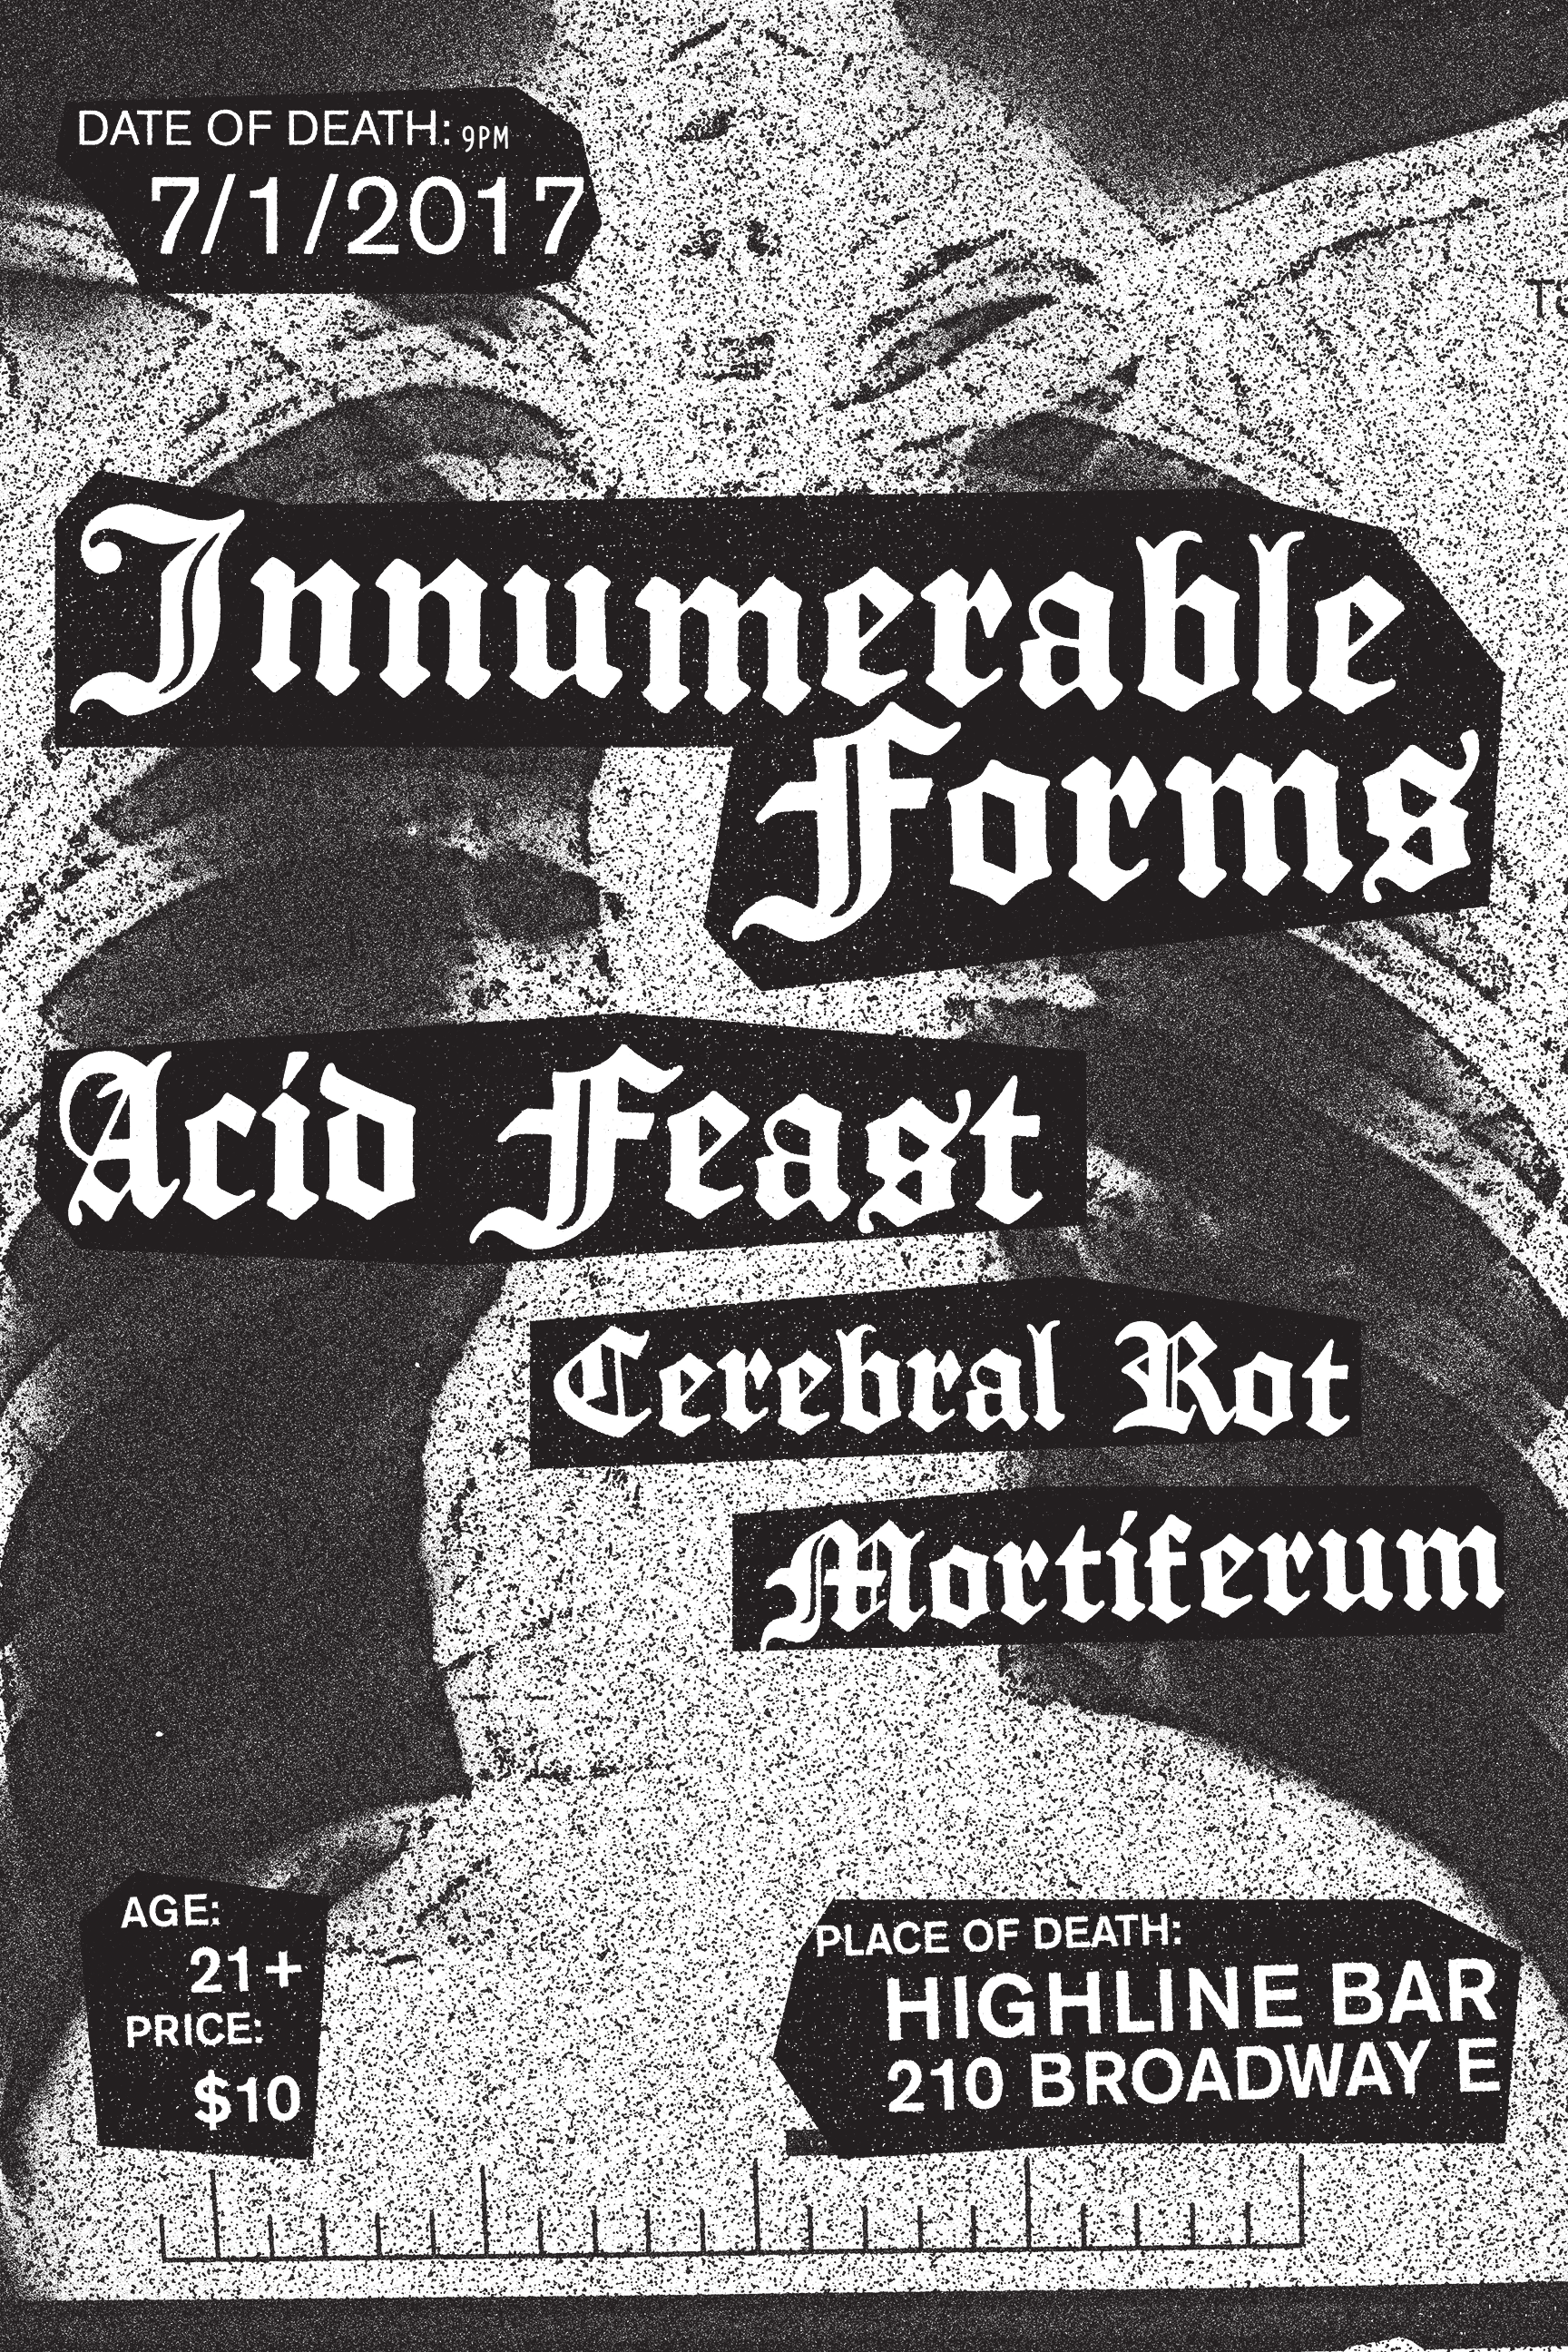 Innummerable Forms Poster